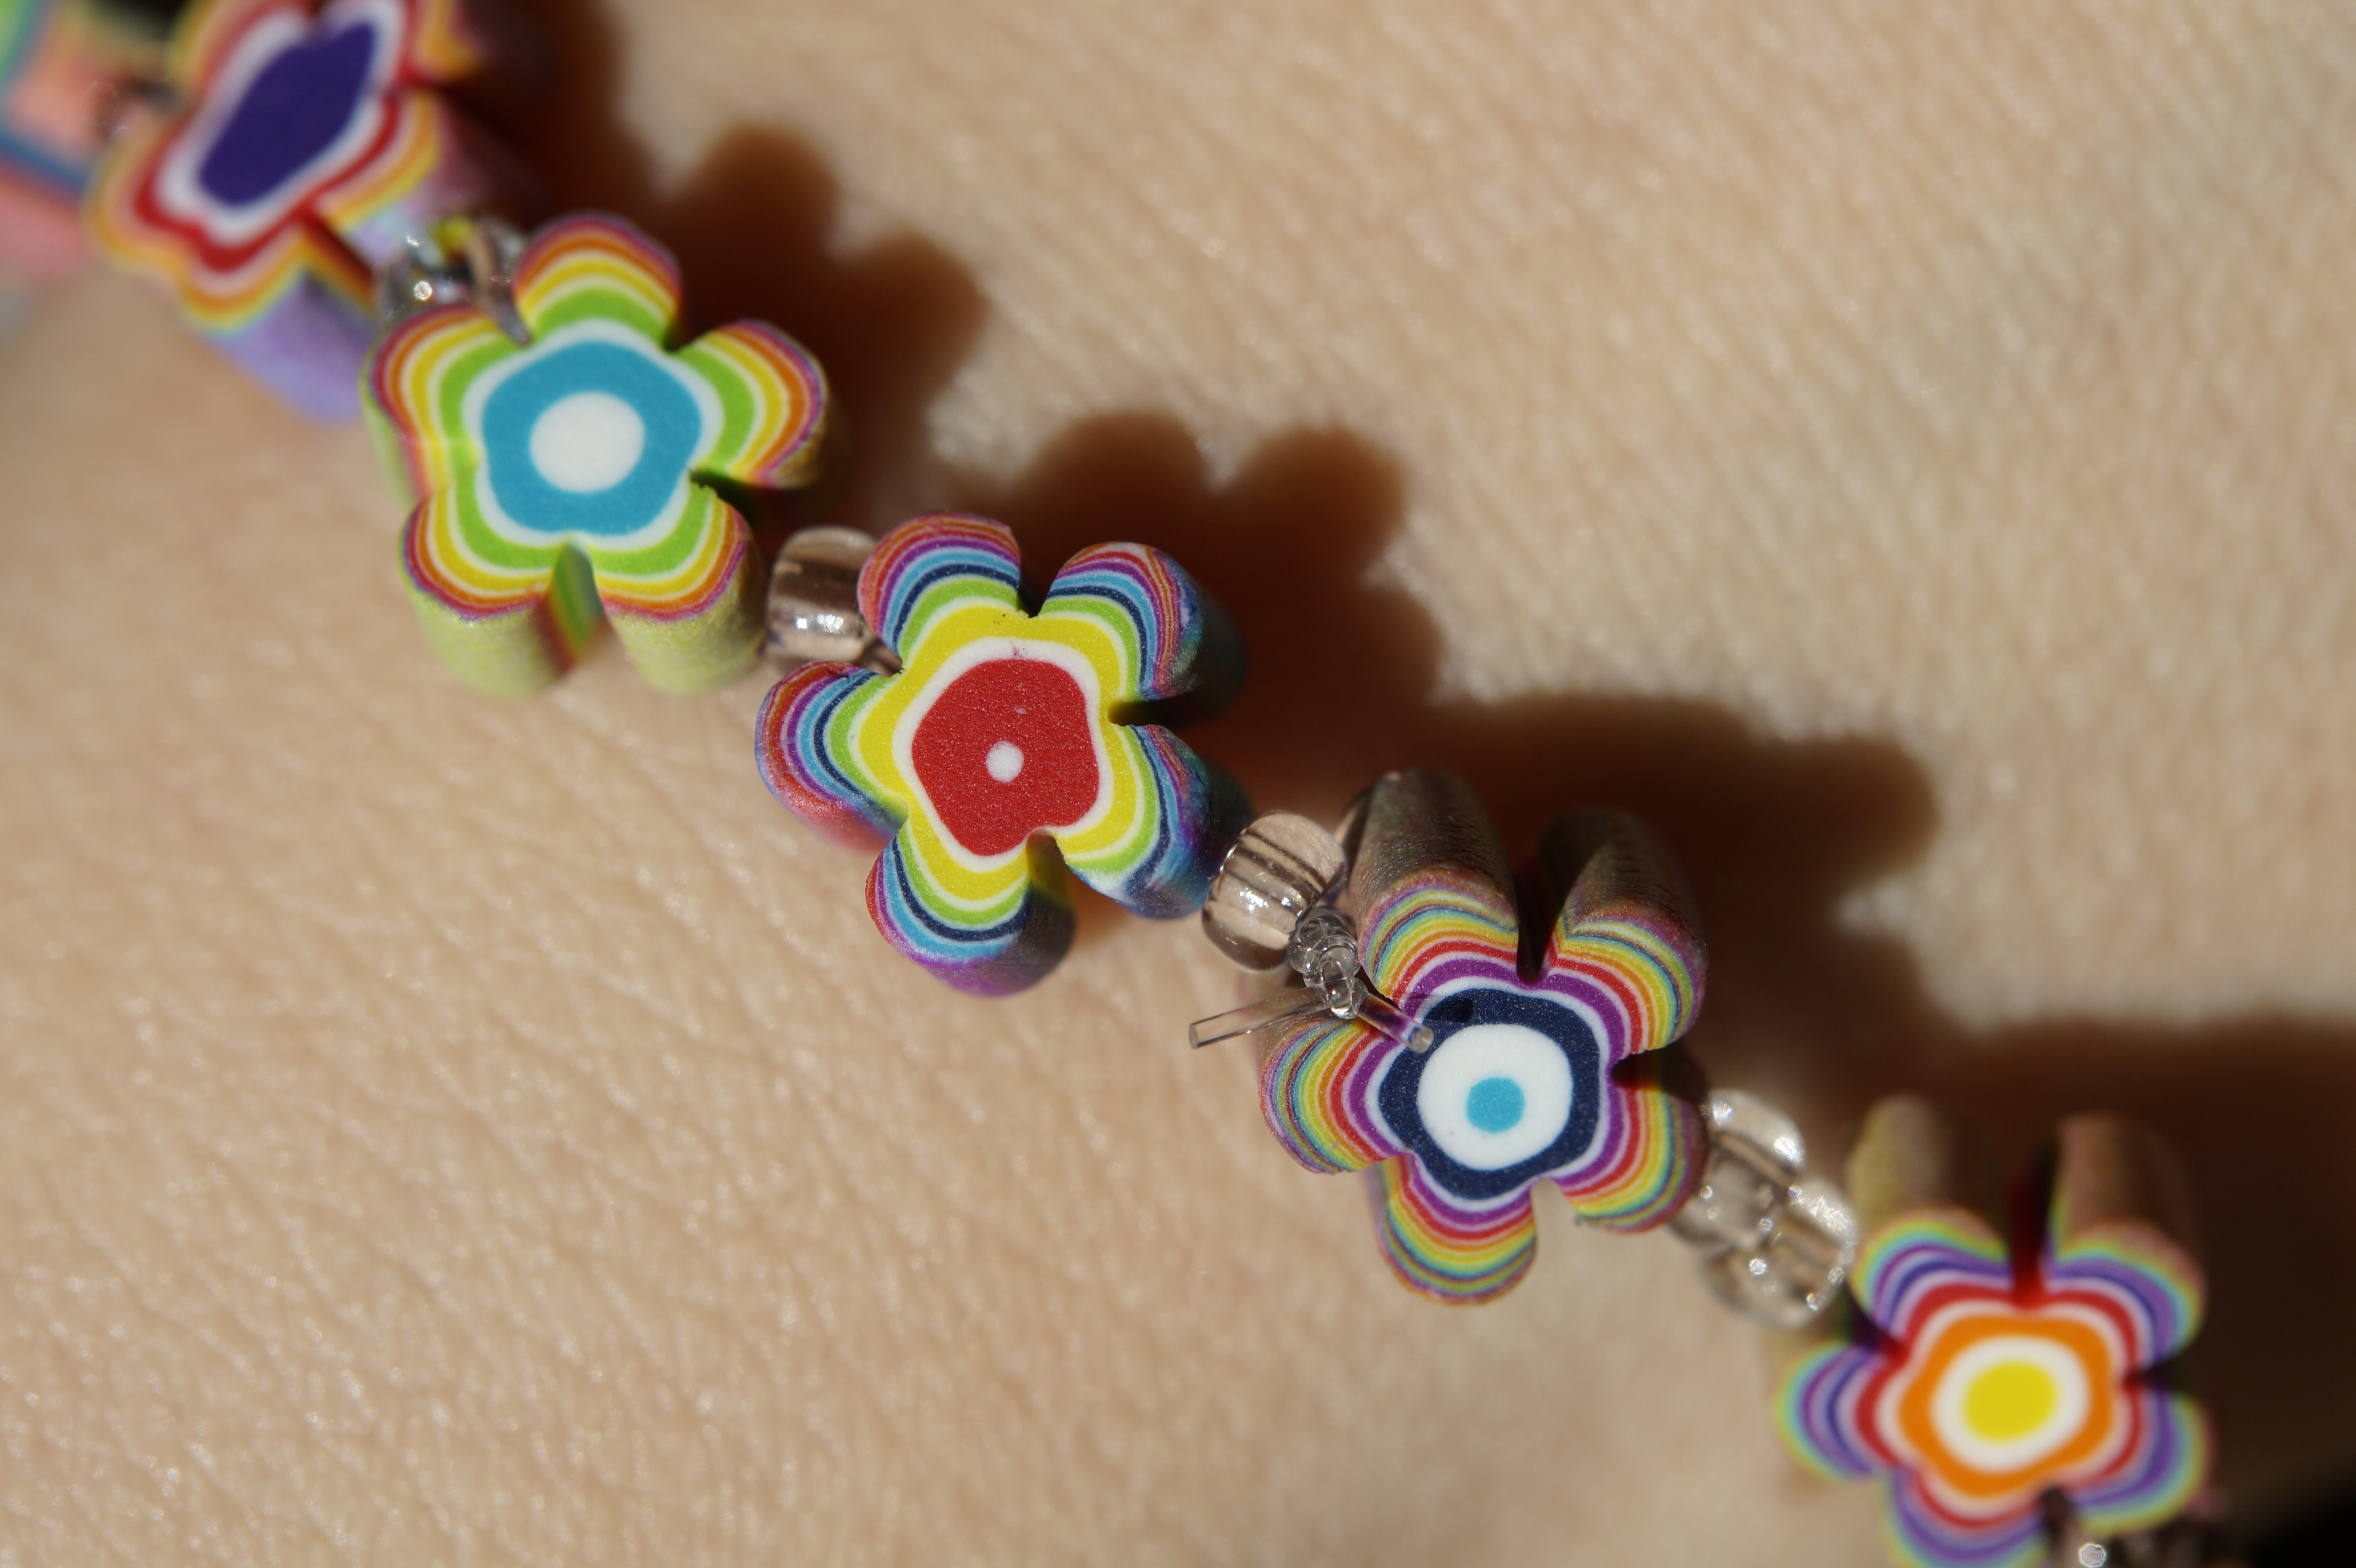 Bracelet, Floral, Flowers, Colorful, multi colored, no people